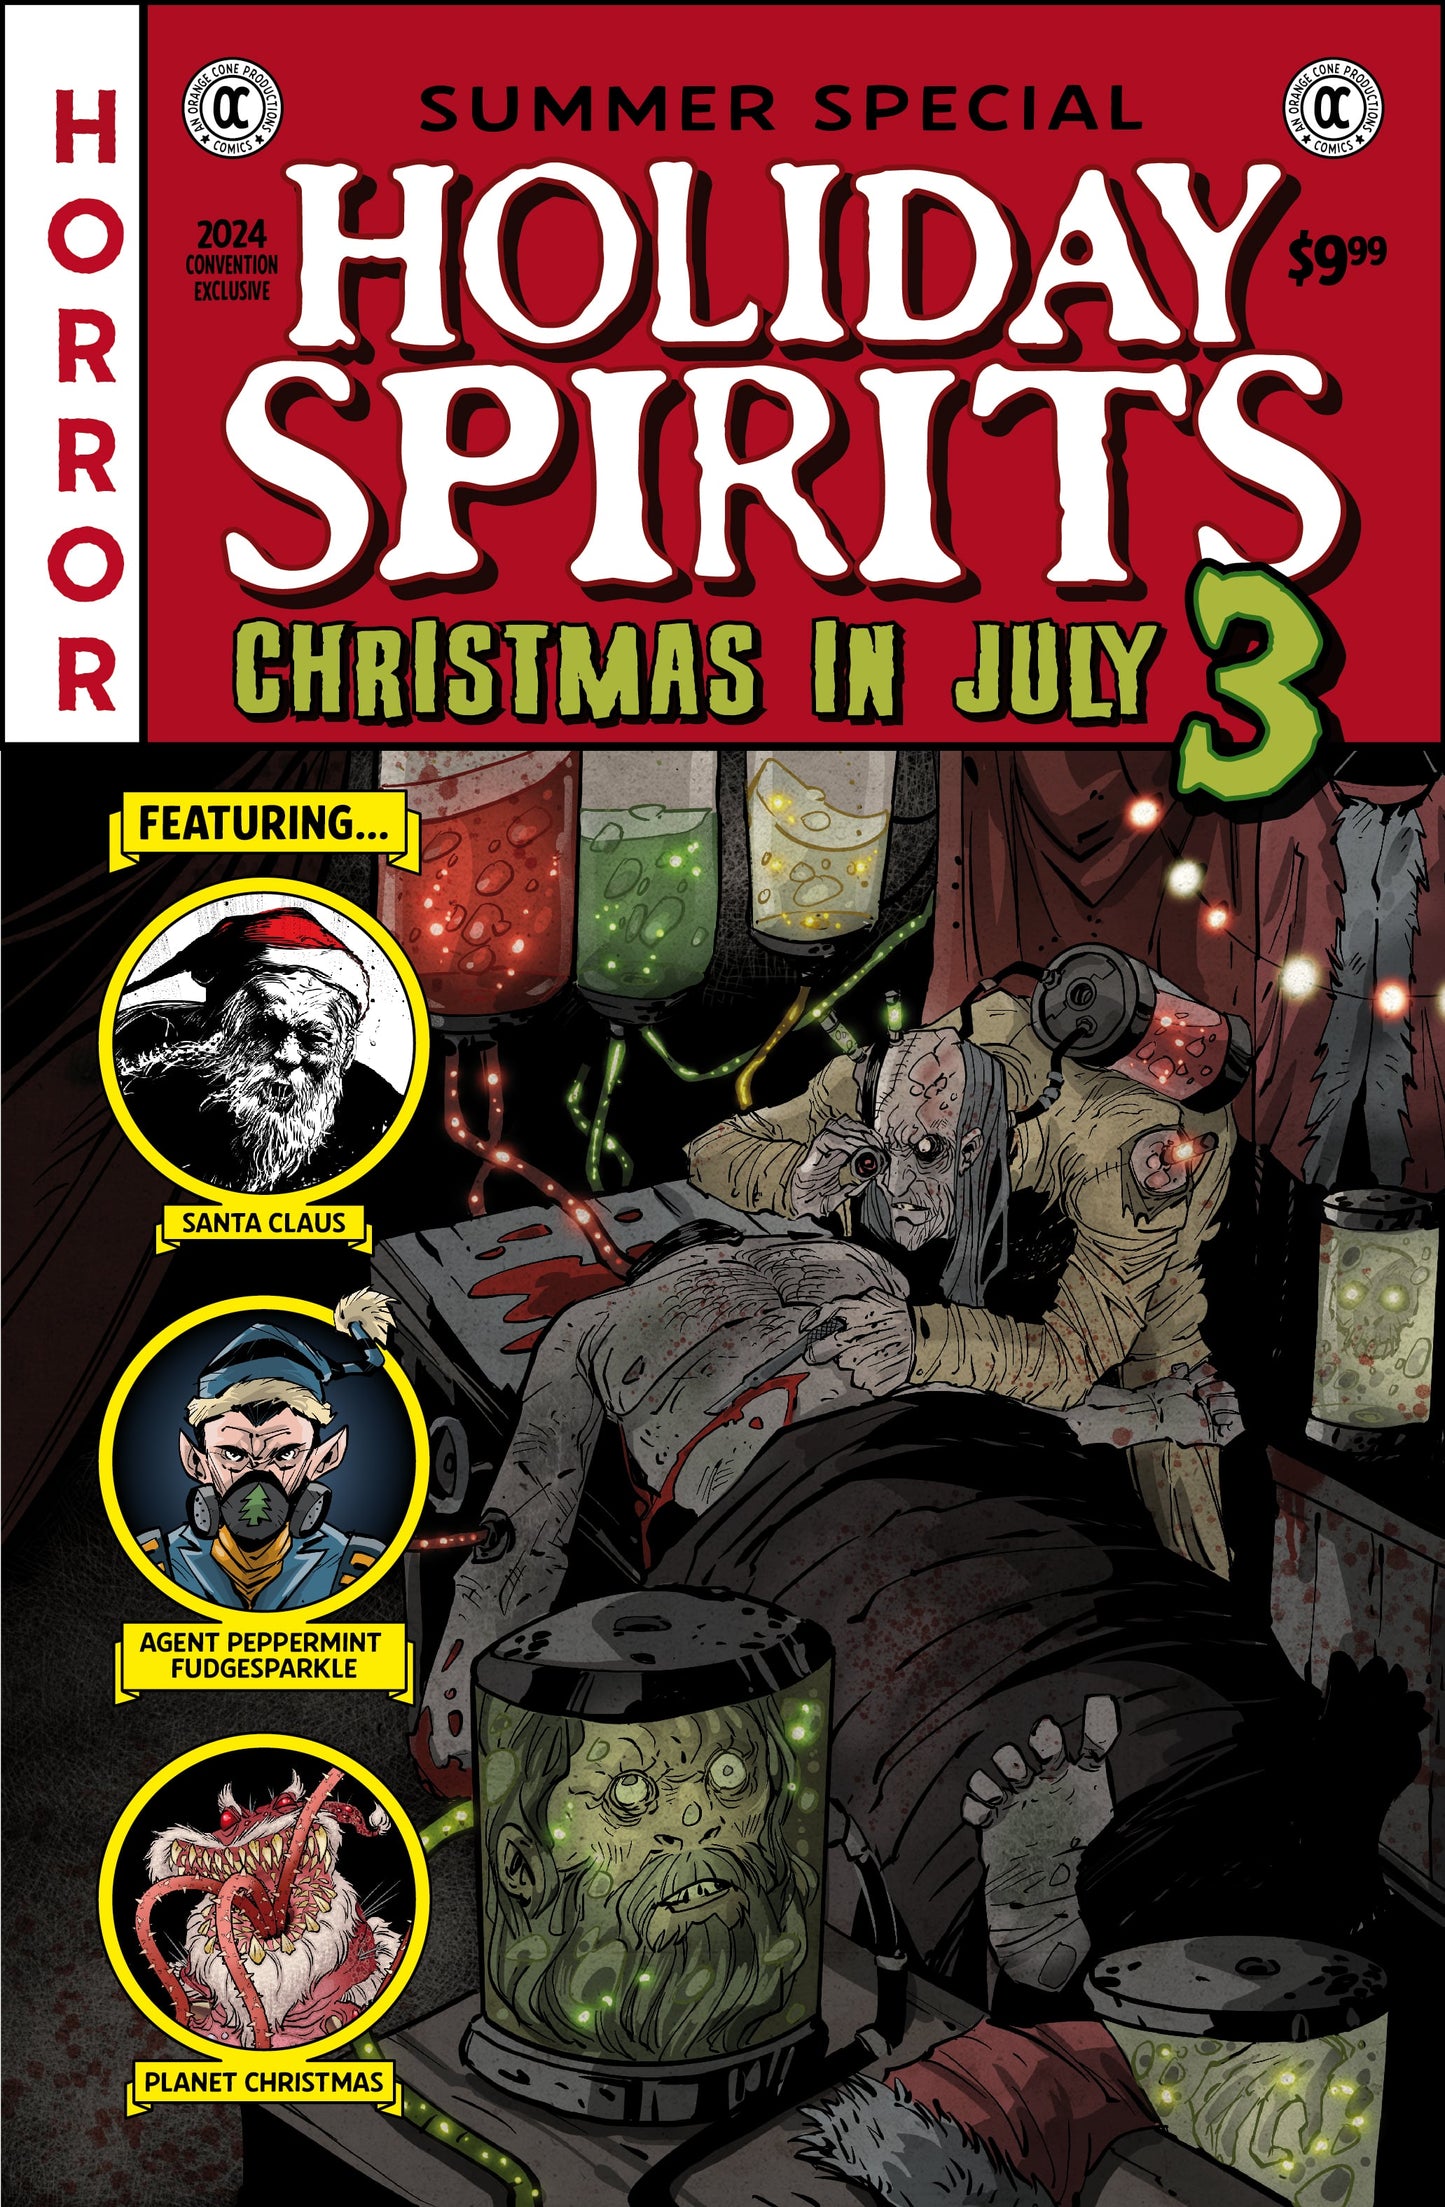 Holiday Spirits - Christmas In July 3 (Convention Special)